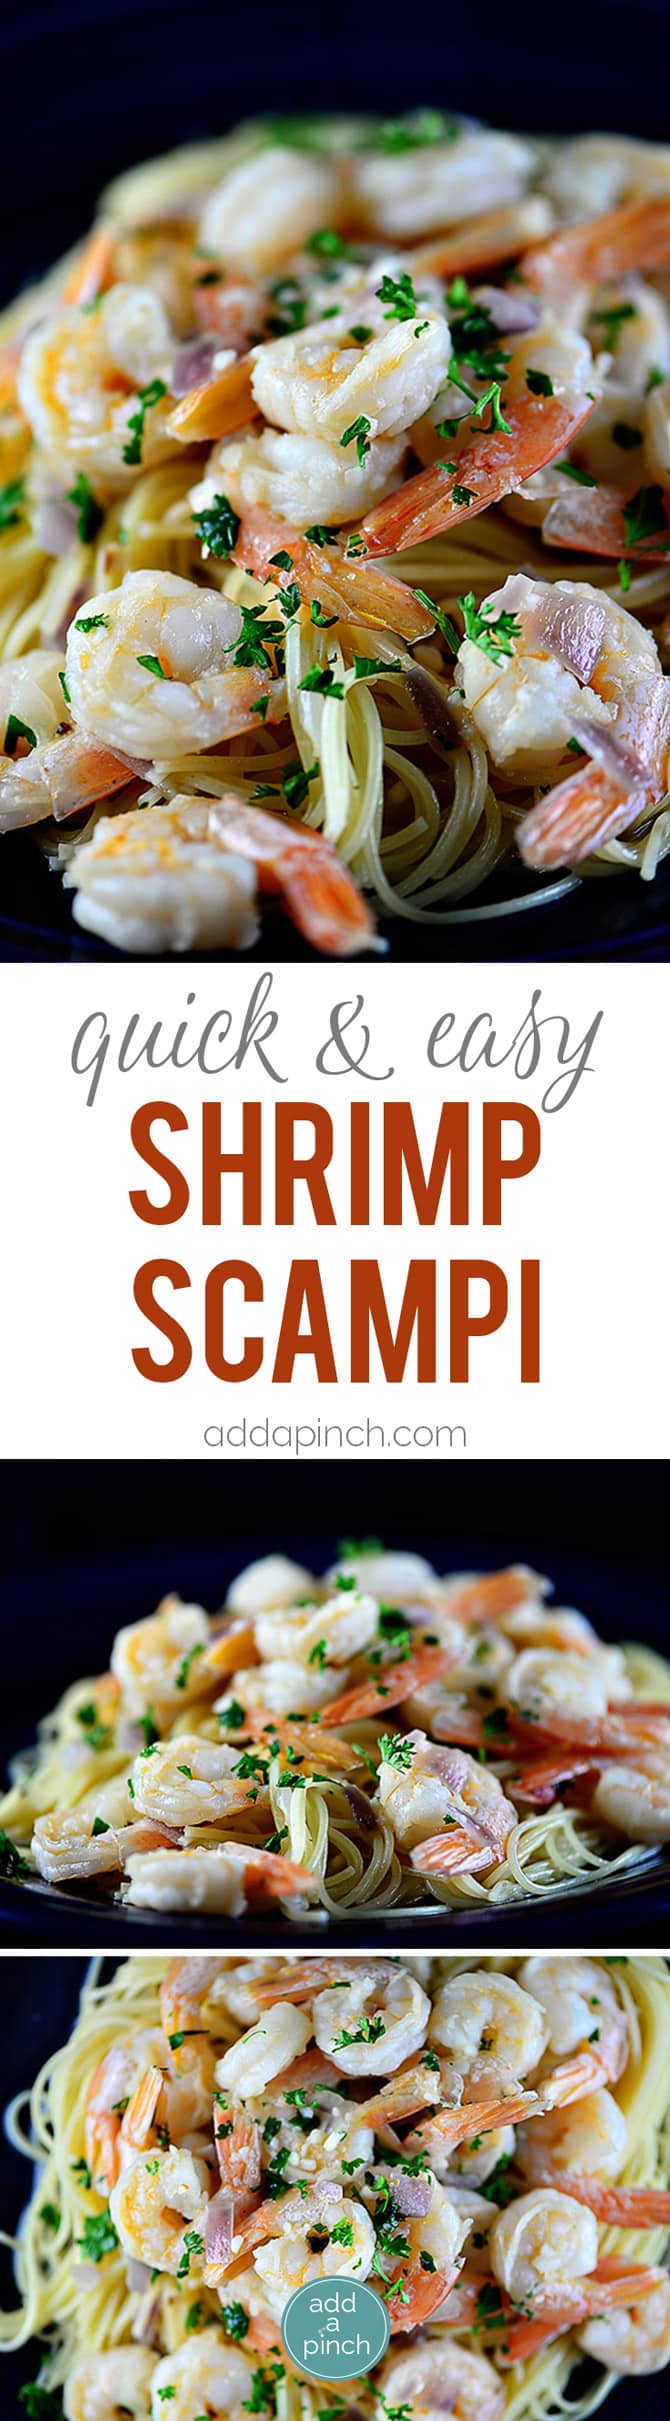 Shrimp scampi is easy and elegant, perfect for entertaining. Made of shrimp sautéed in butter and olive oil, garlic, and gently tossed with red onion and parsley, it is a classic. // addapinch.com